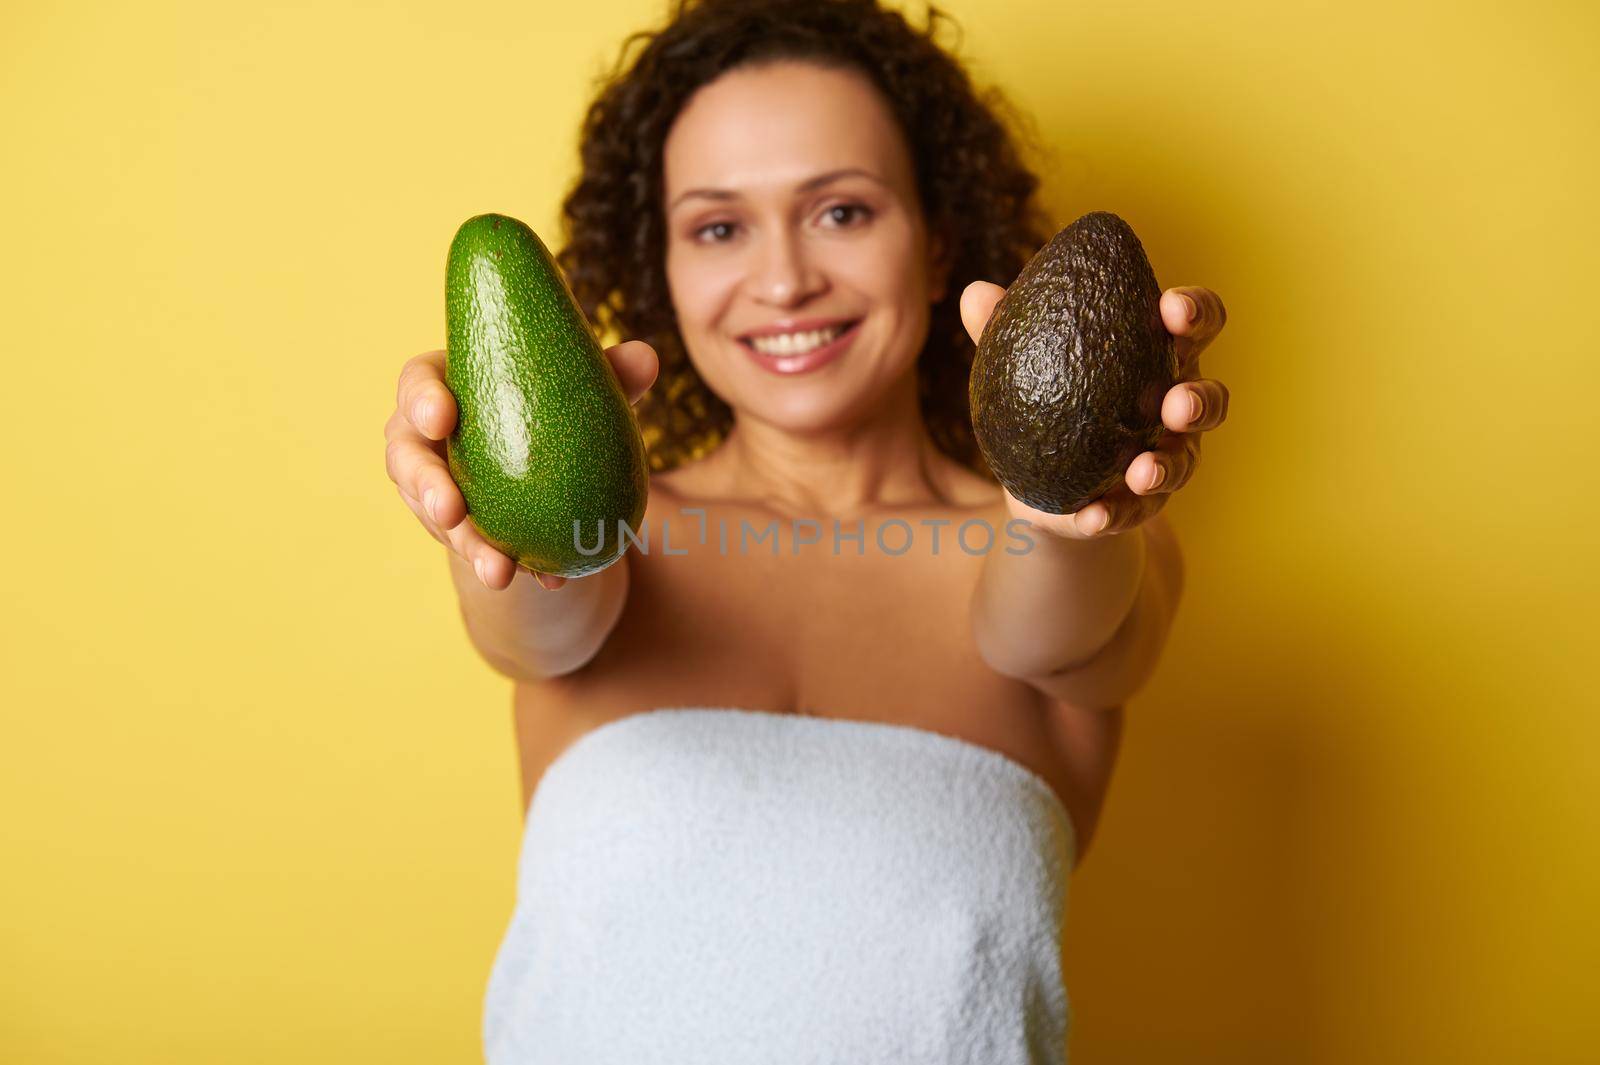 Soft focus on ripe ready-to-eat avocado fruit in hands of blurry half-naked curly smiling woman wrapped in towel. by artgf